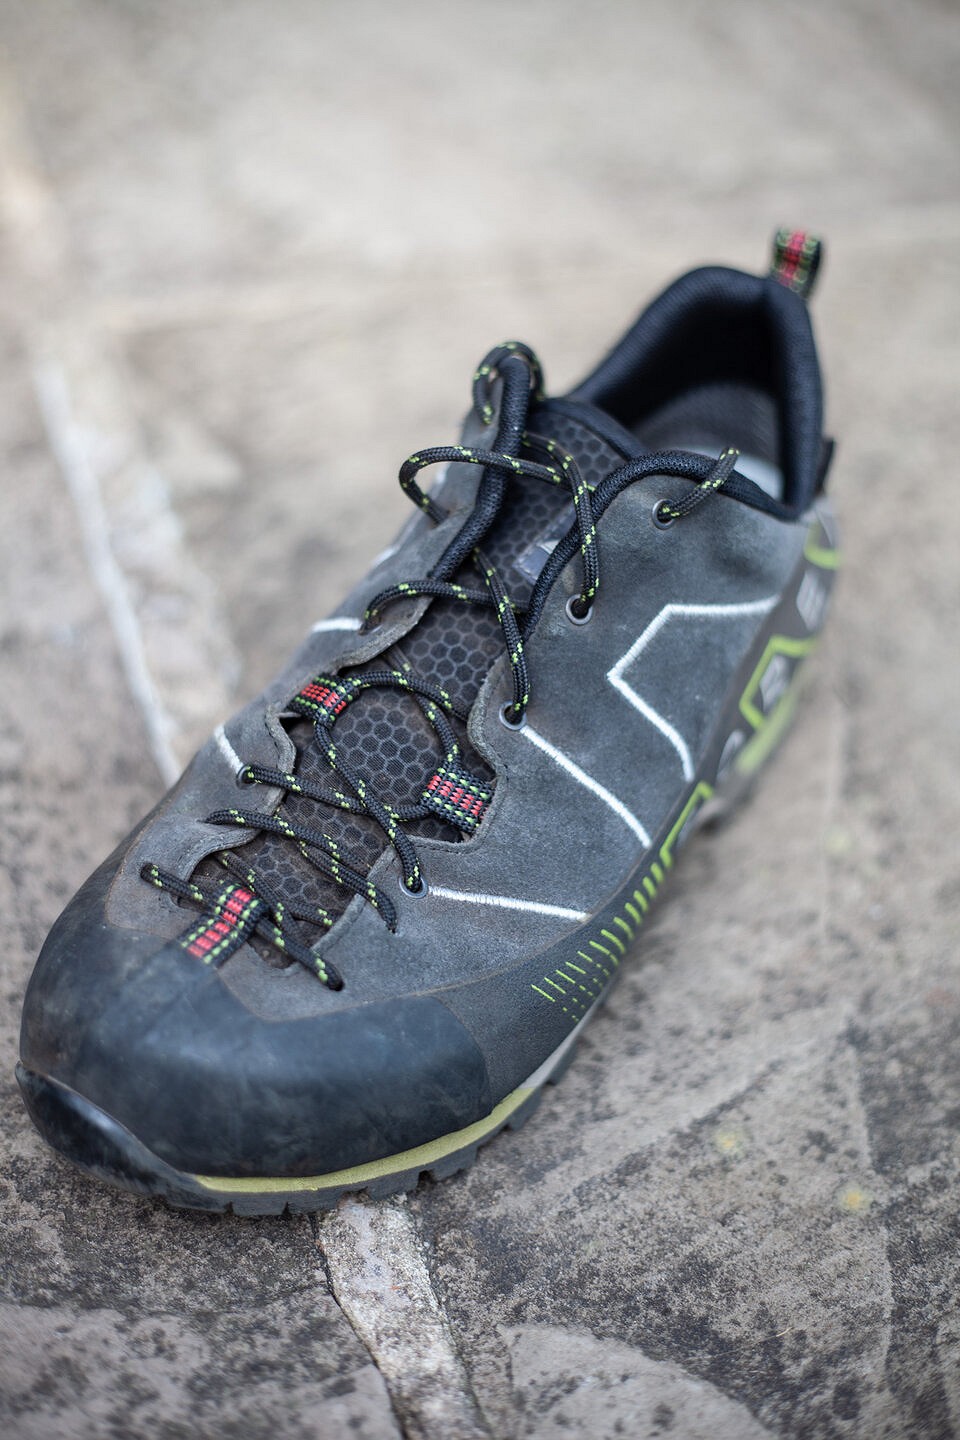 Full length lacing allows a precision of fit (but they're still pretty wide)  © UKC Gear